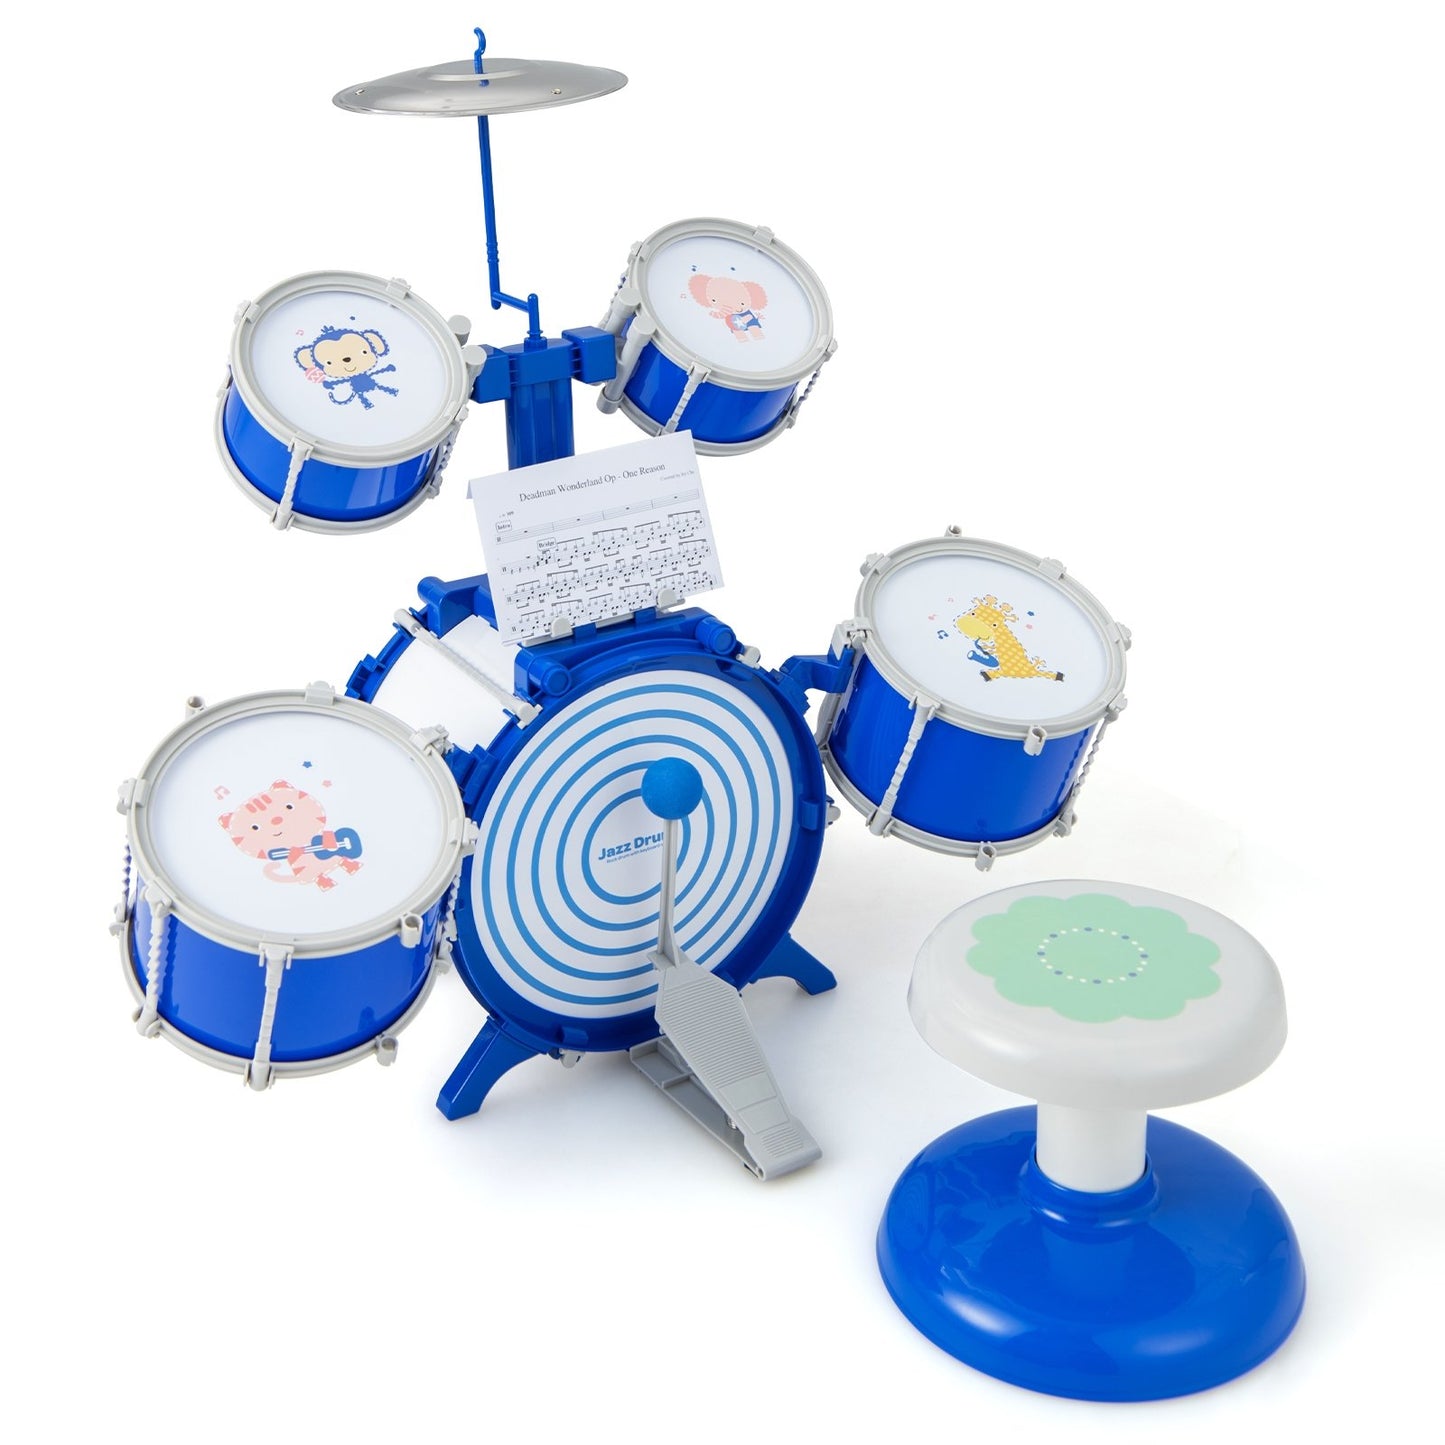 Kids Drum Set Educational Percussion Musical Instrument Toy with Bass Drum, Blue